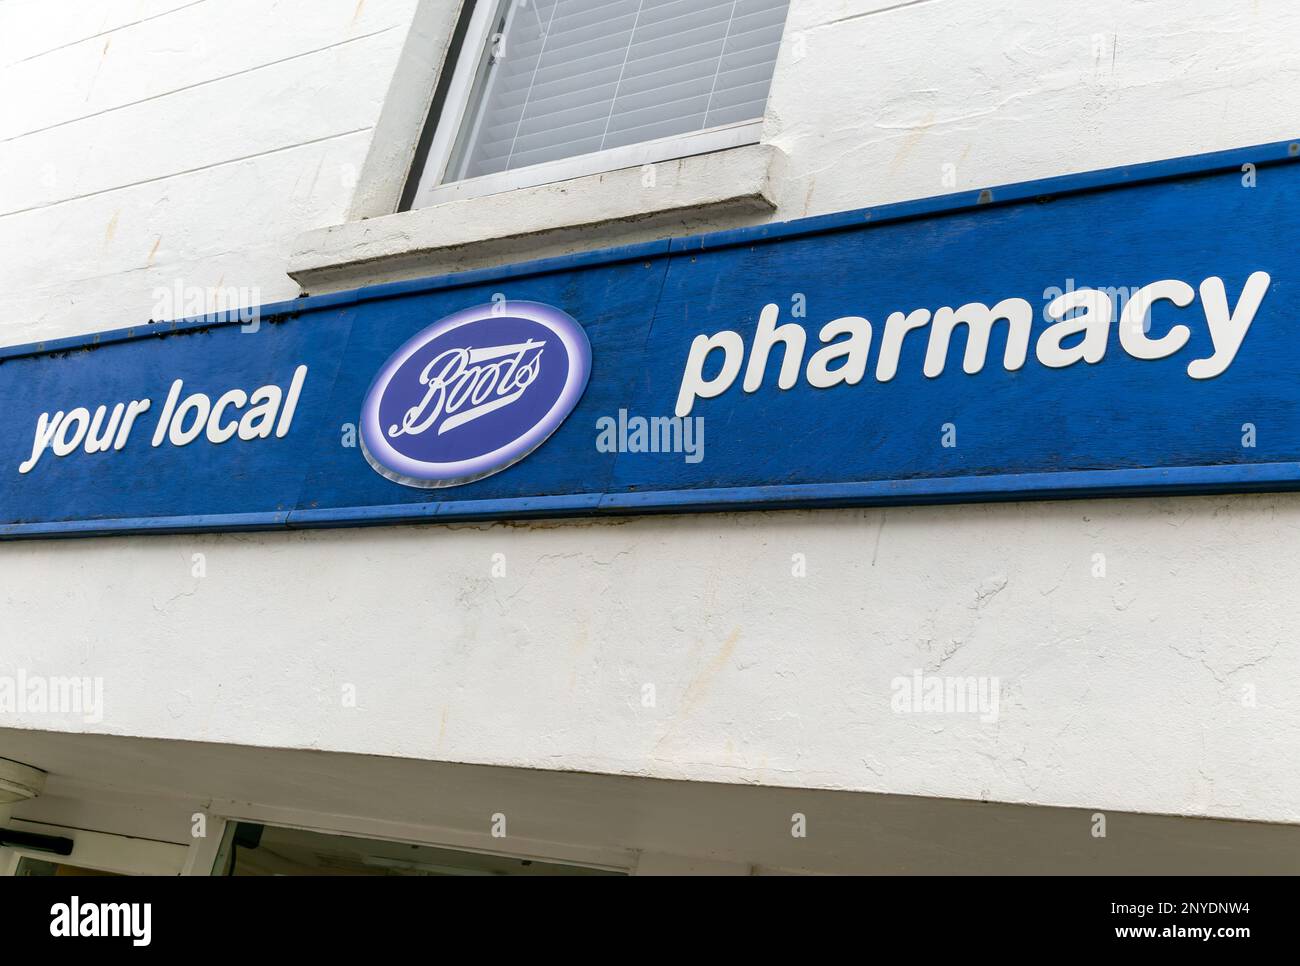 Boots Your Local Pharmacy sign outside chemist shop, Salcombe, Devon, England, UK Stock Photo